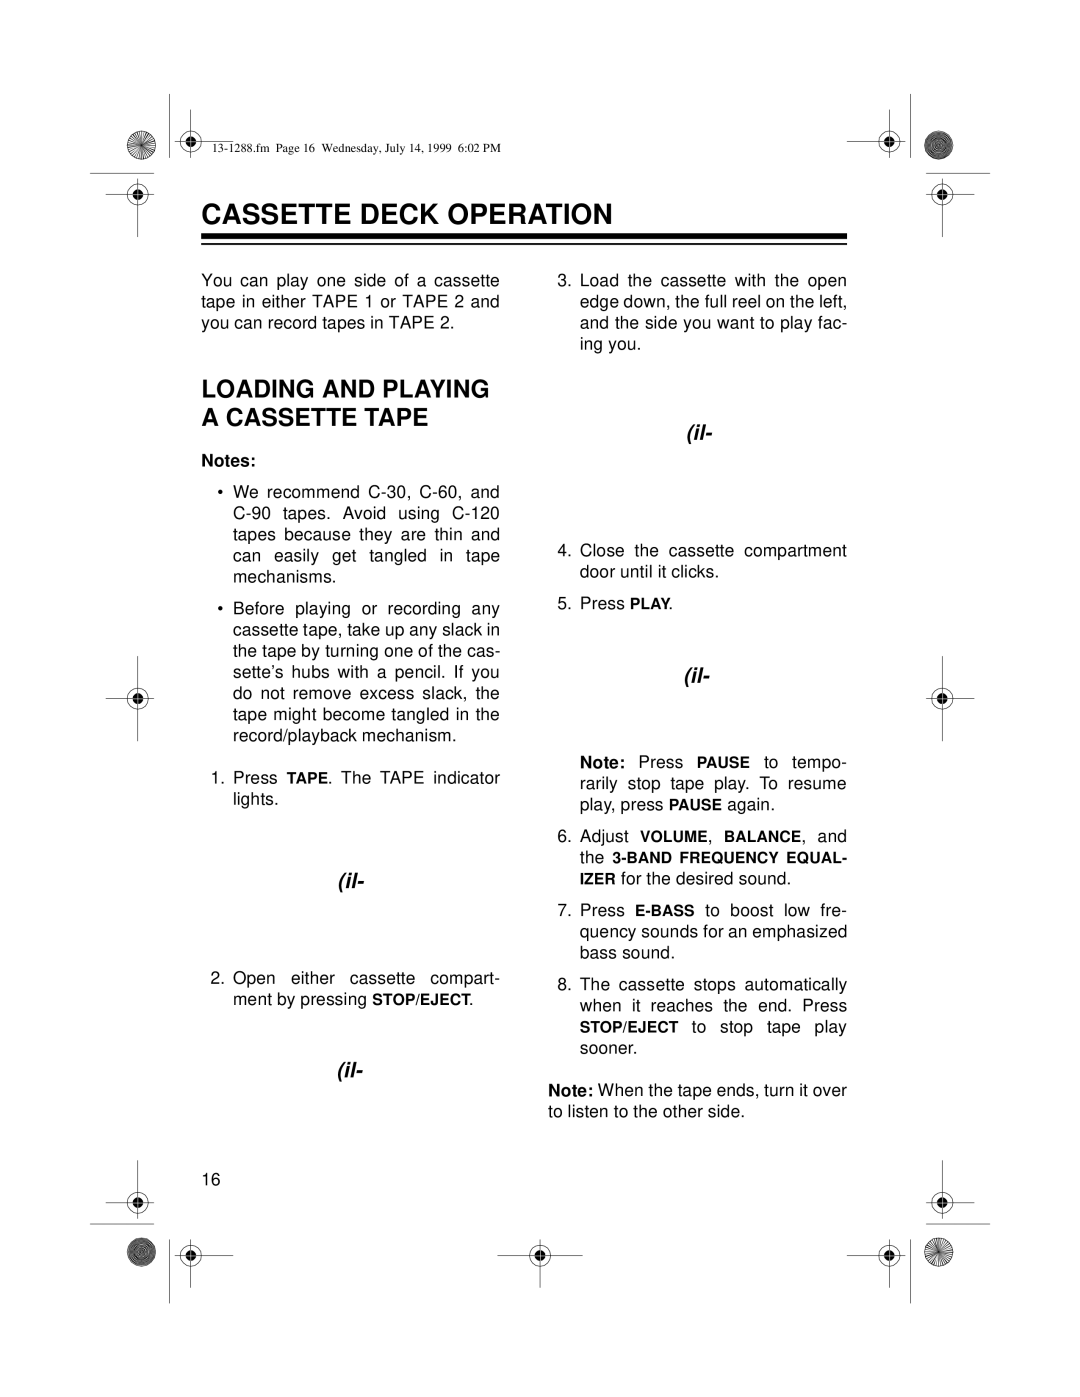 Optimus 13-1288 owner manual Cassette Deck Operation, Loading And Playing A Cassette Tape 